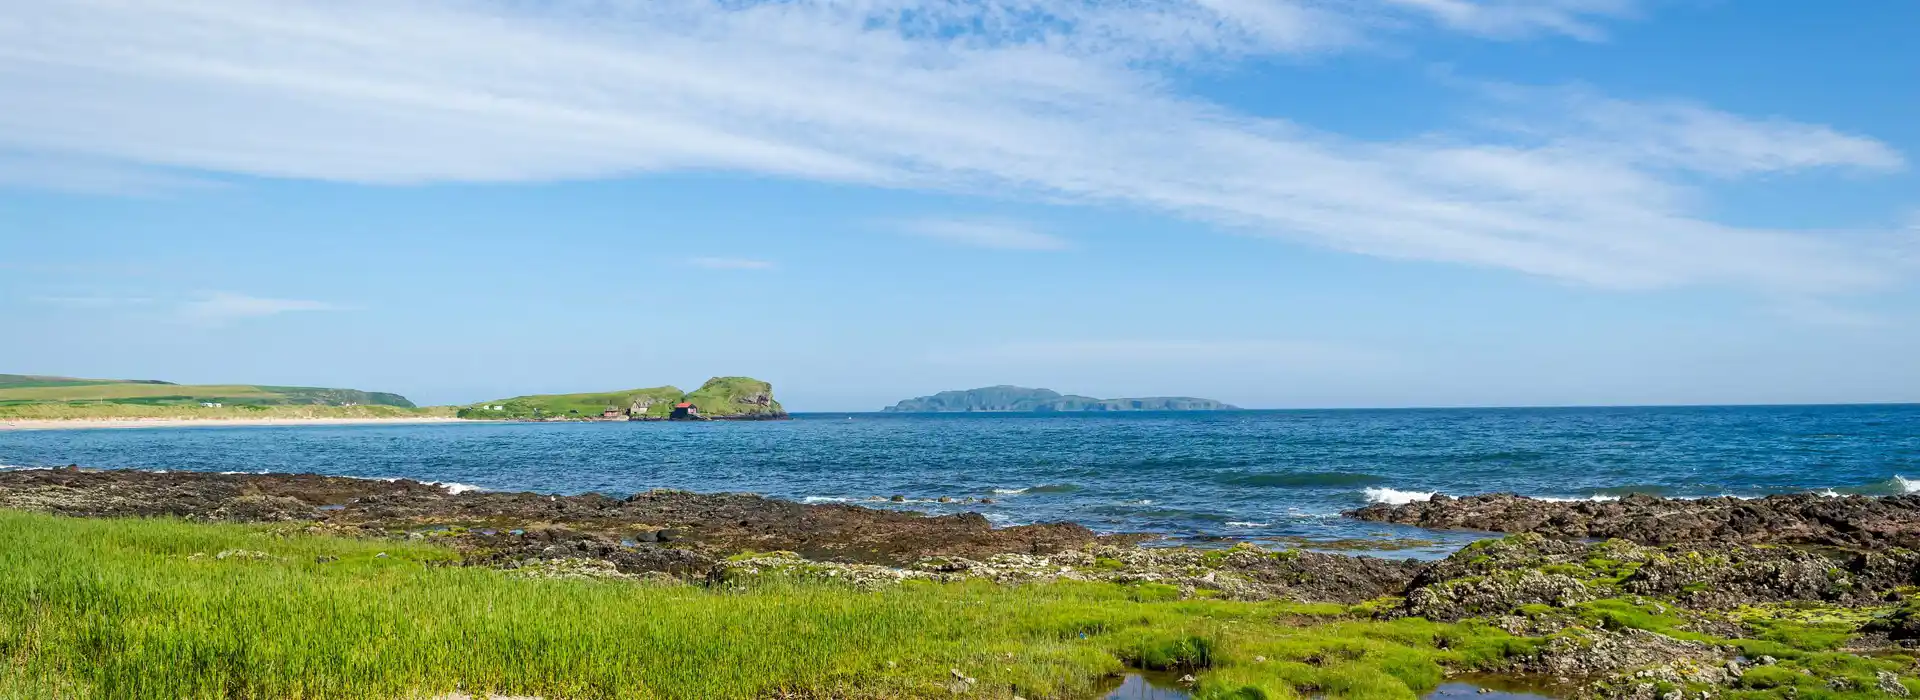 Campsites near the Mull of Kintyre